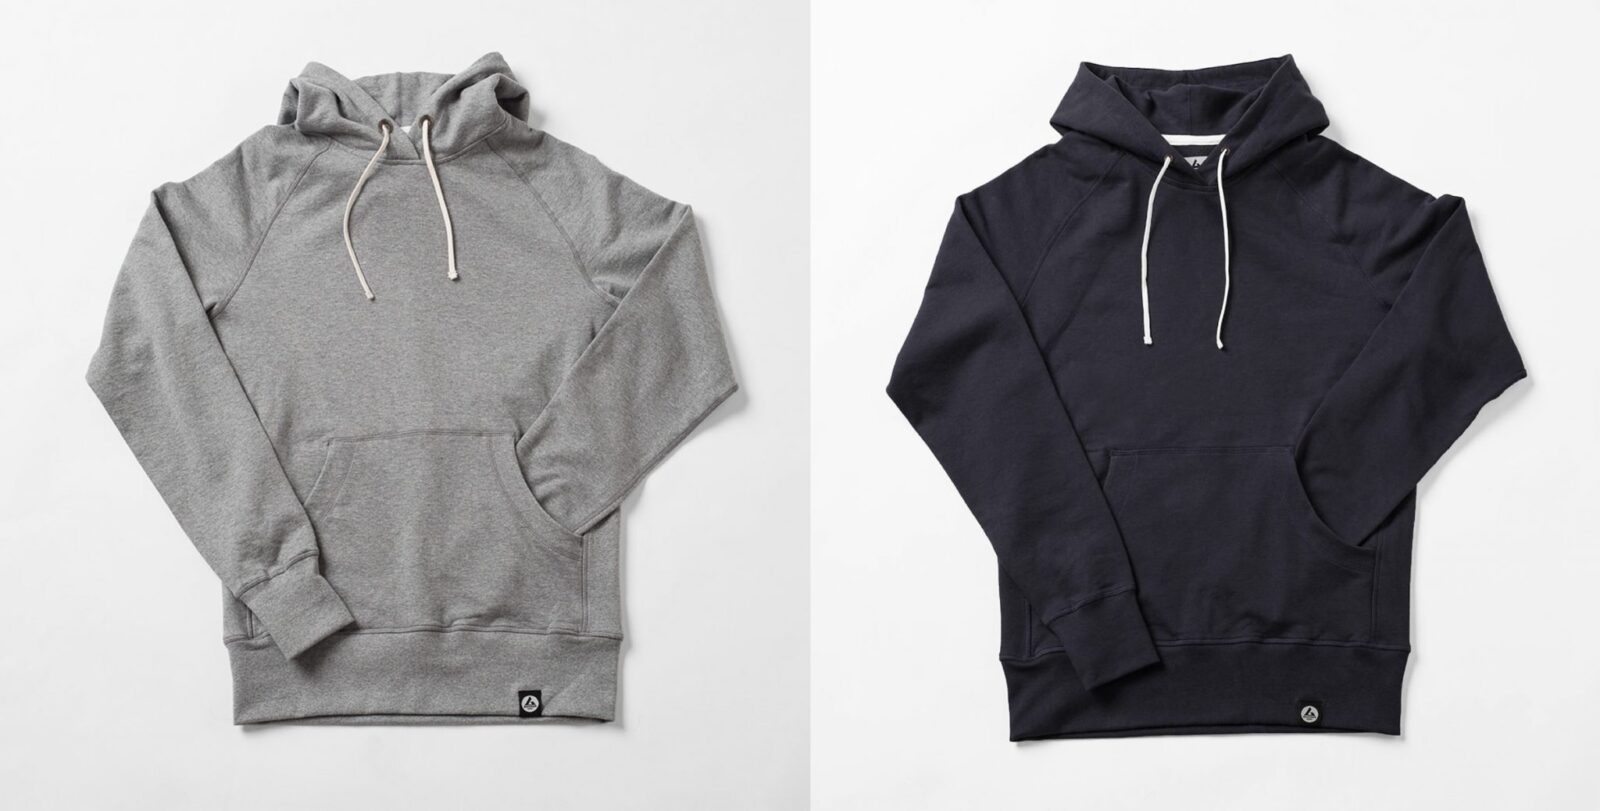 Middleweight Hoodie by American Giant